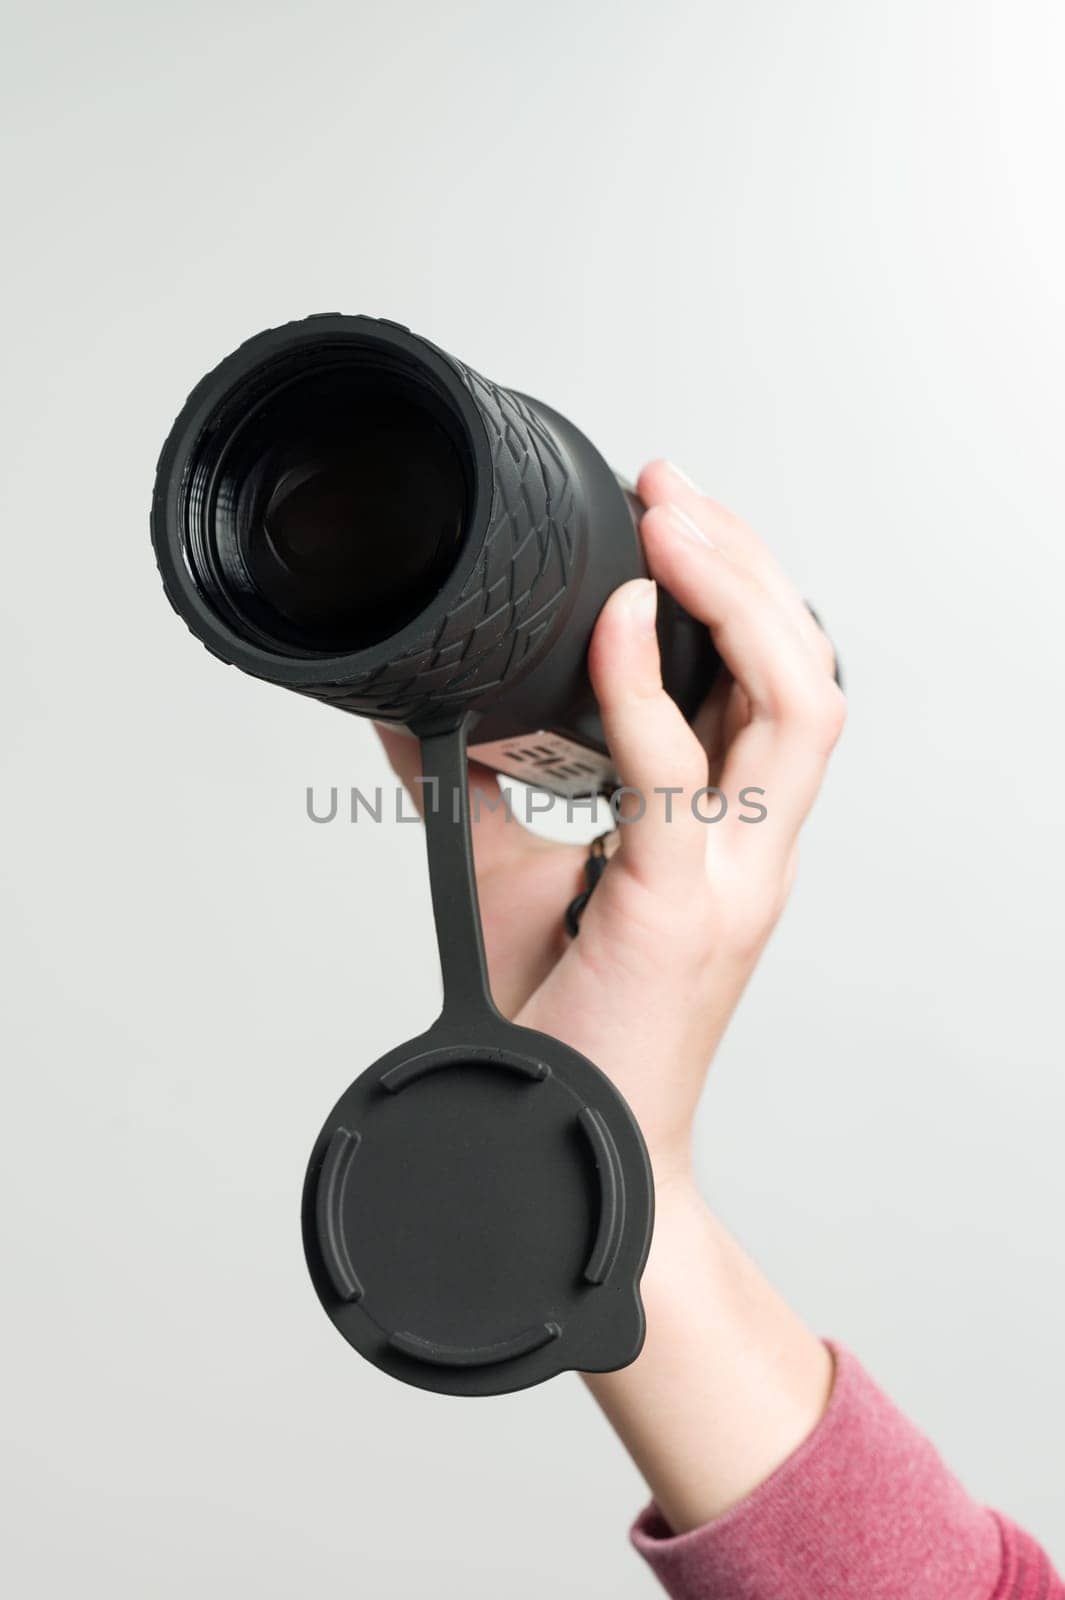 The child is holding a monocular on a white background, a long-range thermal imager.